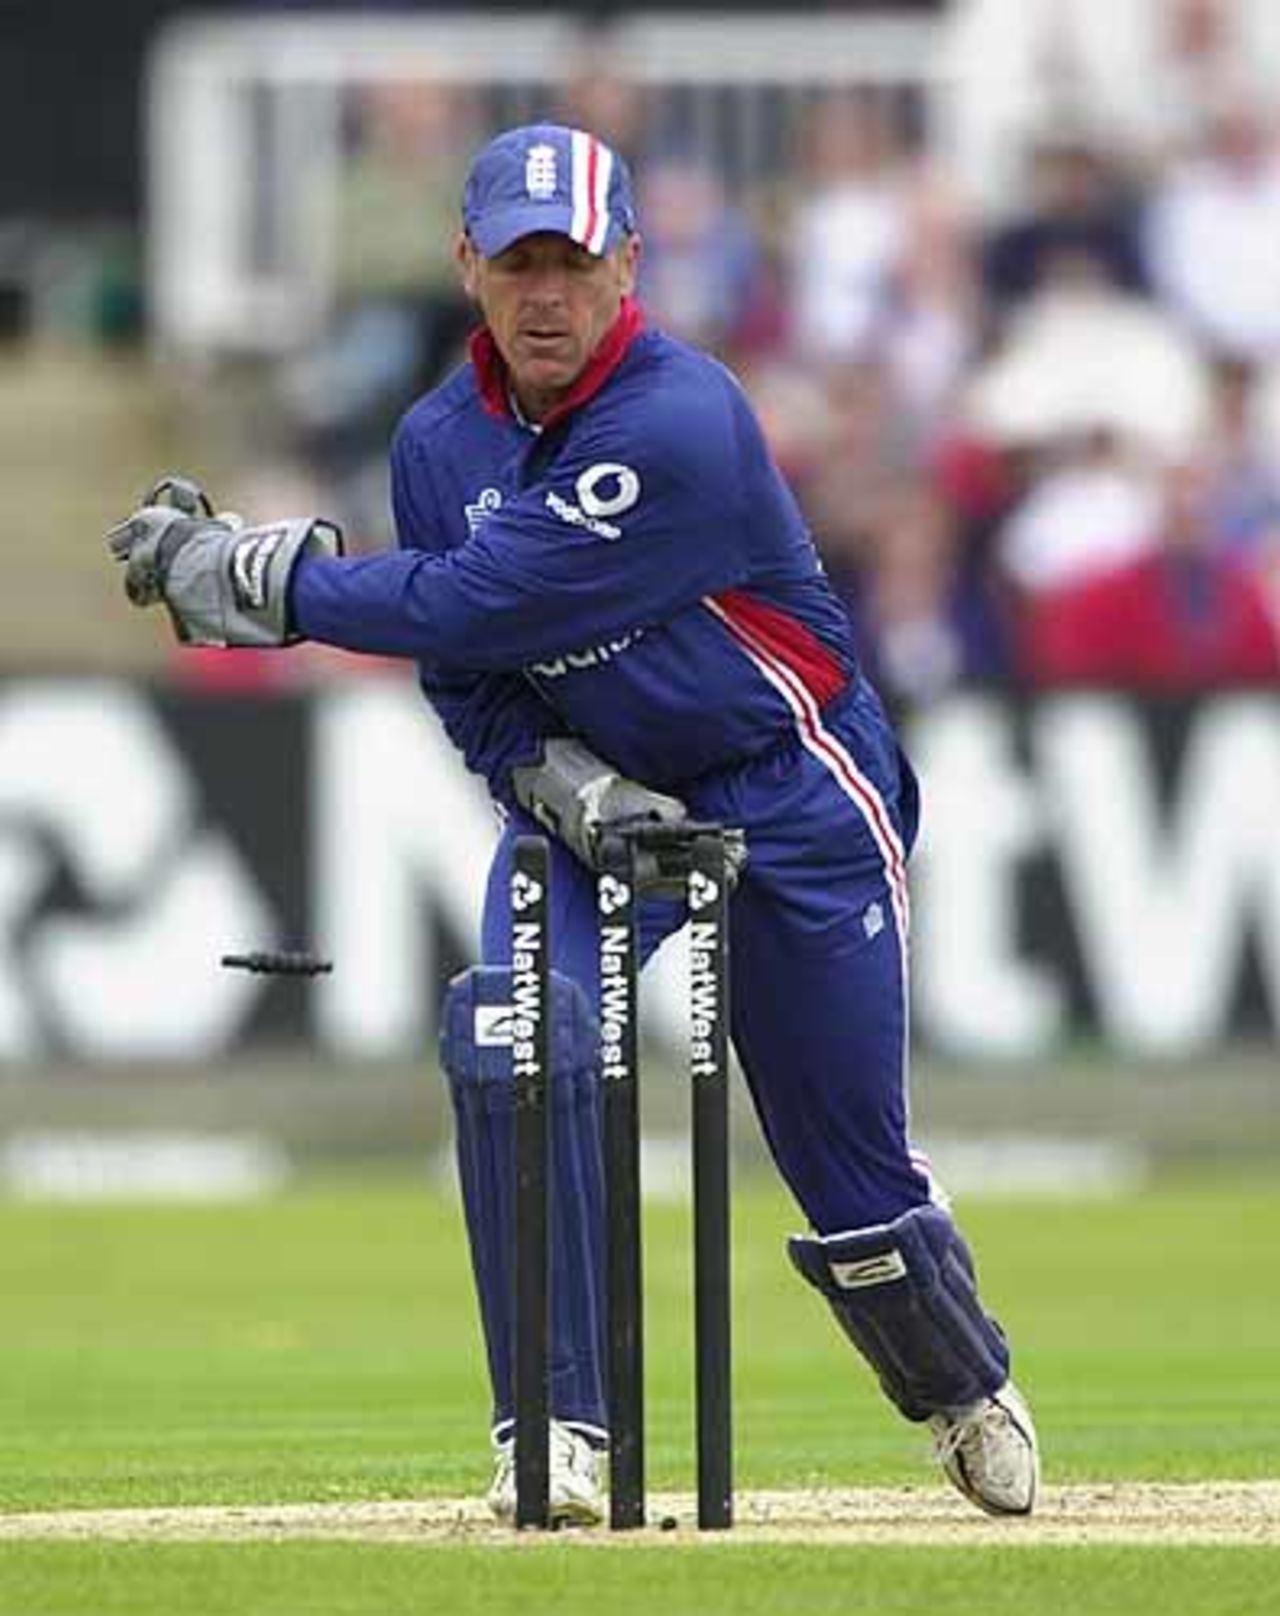 Alec Stewart at the stumps in his 150th ODI for England,England v India at Chester-le-Street, July 2002